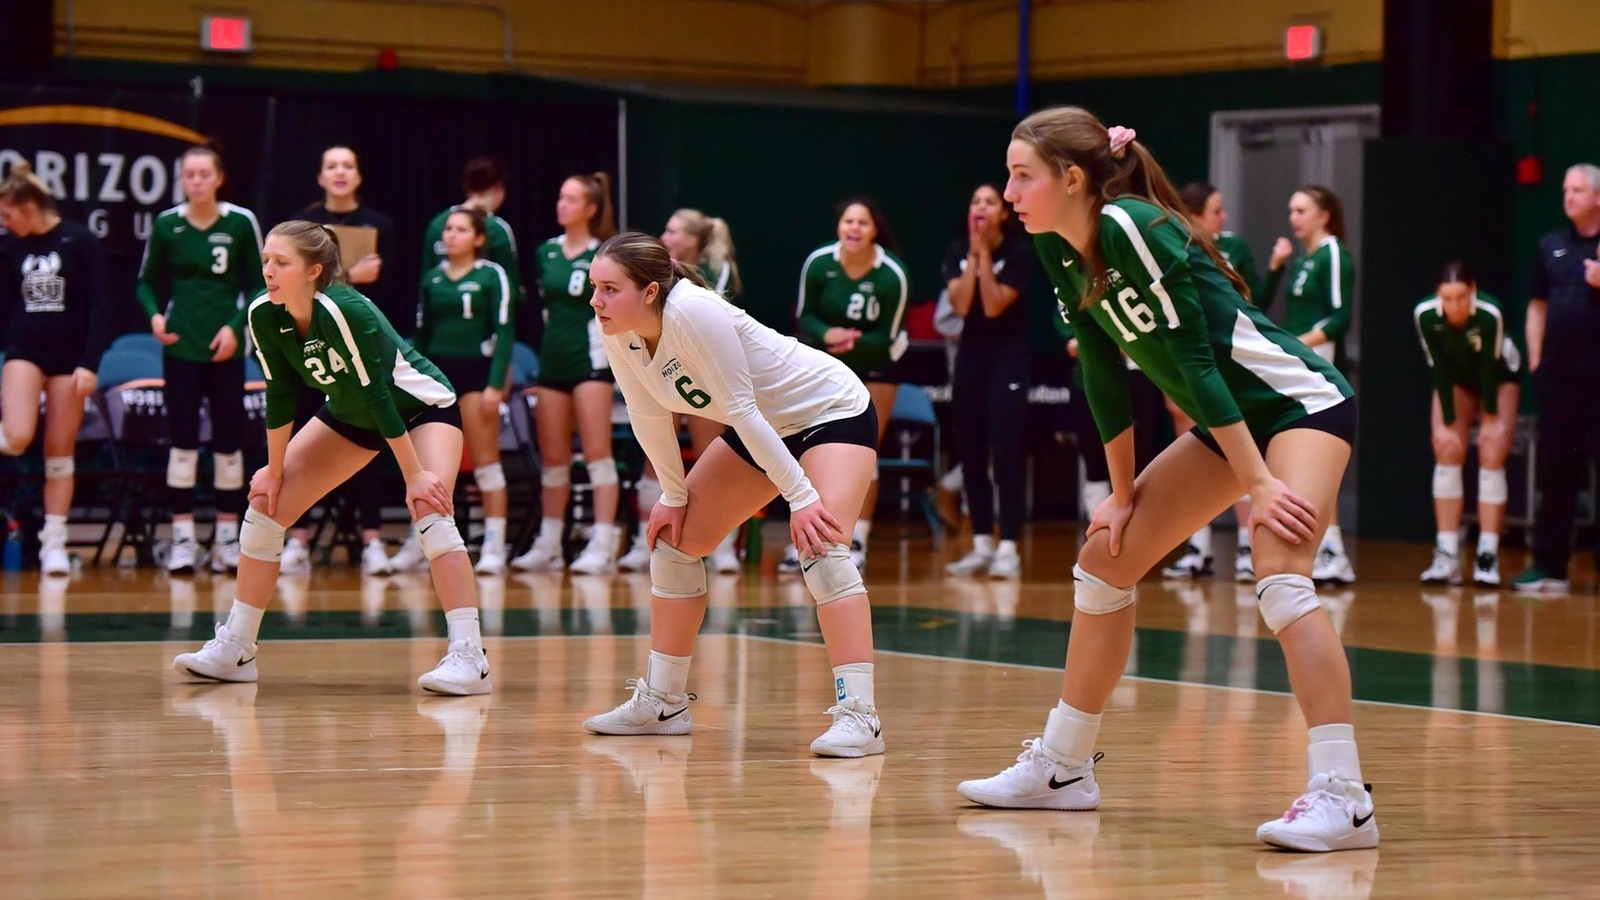 Cleveland State Volleyball Falls In #HLVB Semifinals